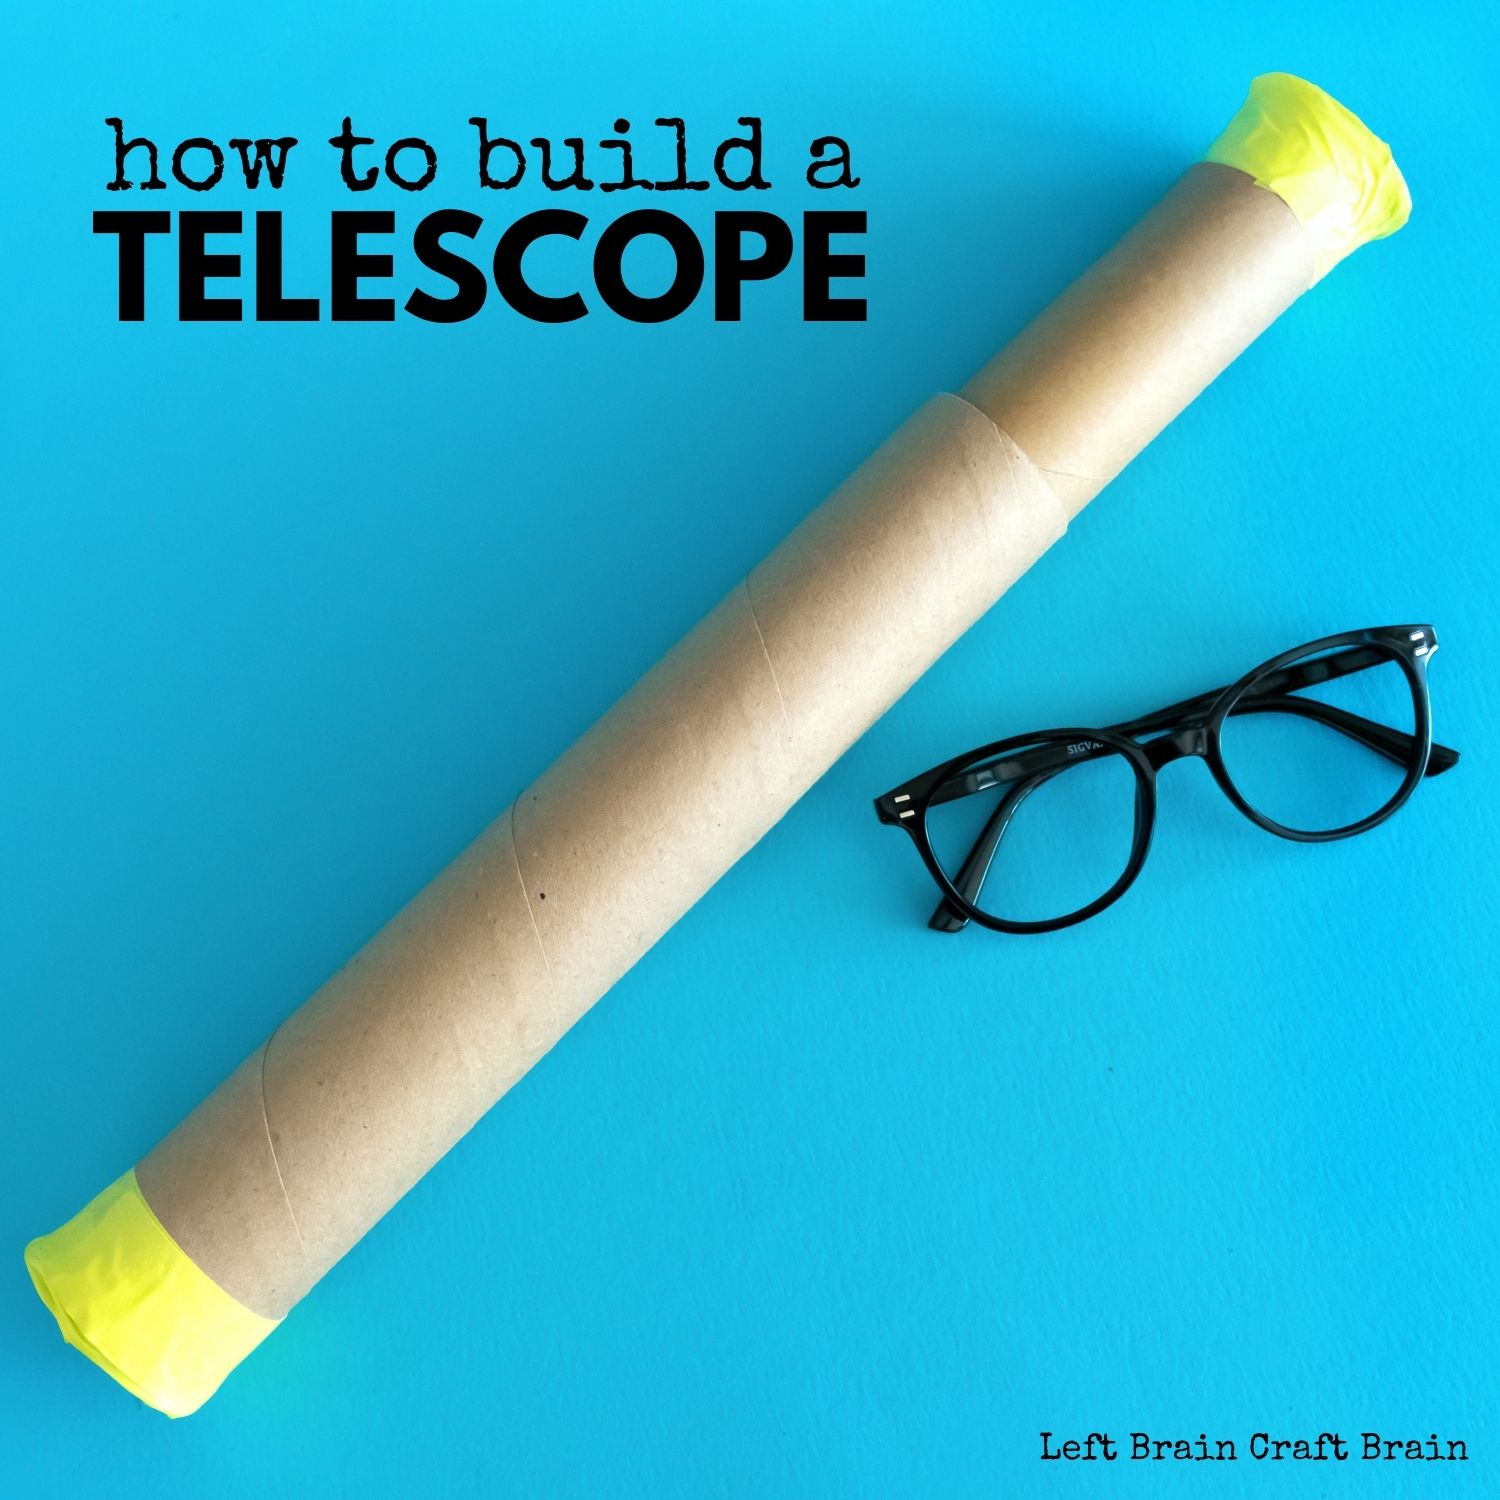 Build a telescope with this fun recycled STEM project and learn about Galileo, lenses, and more.